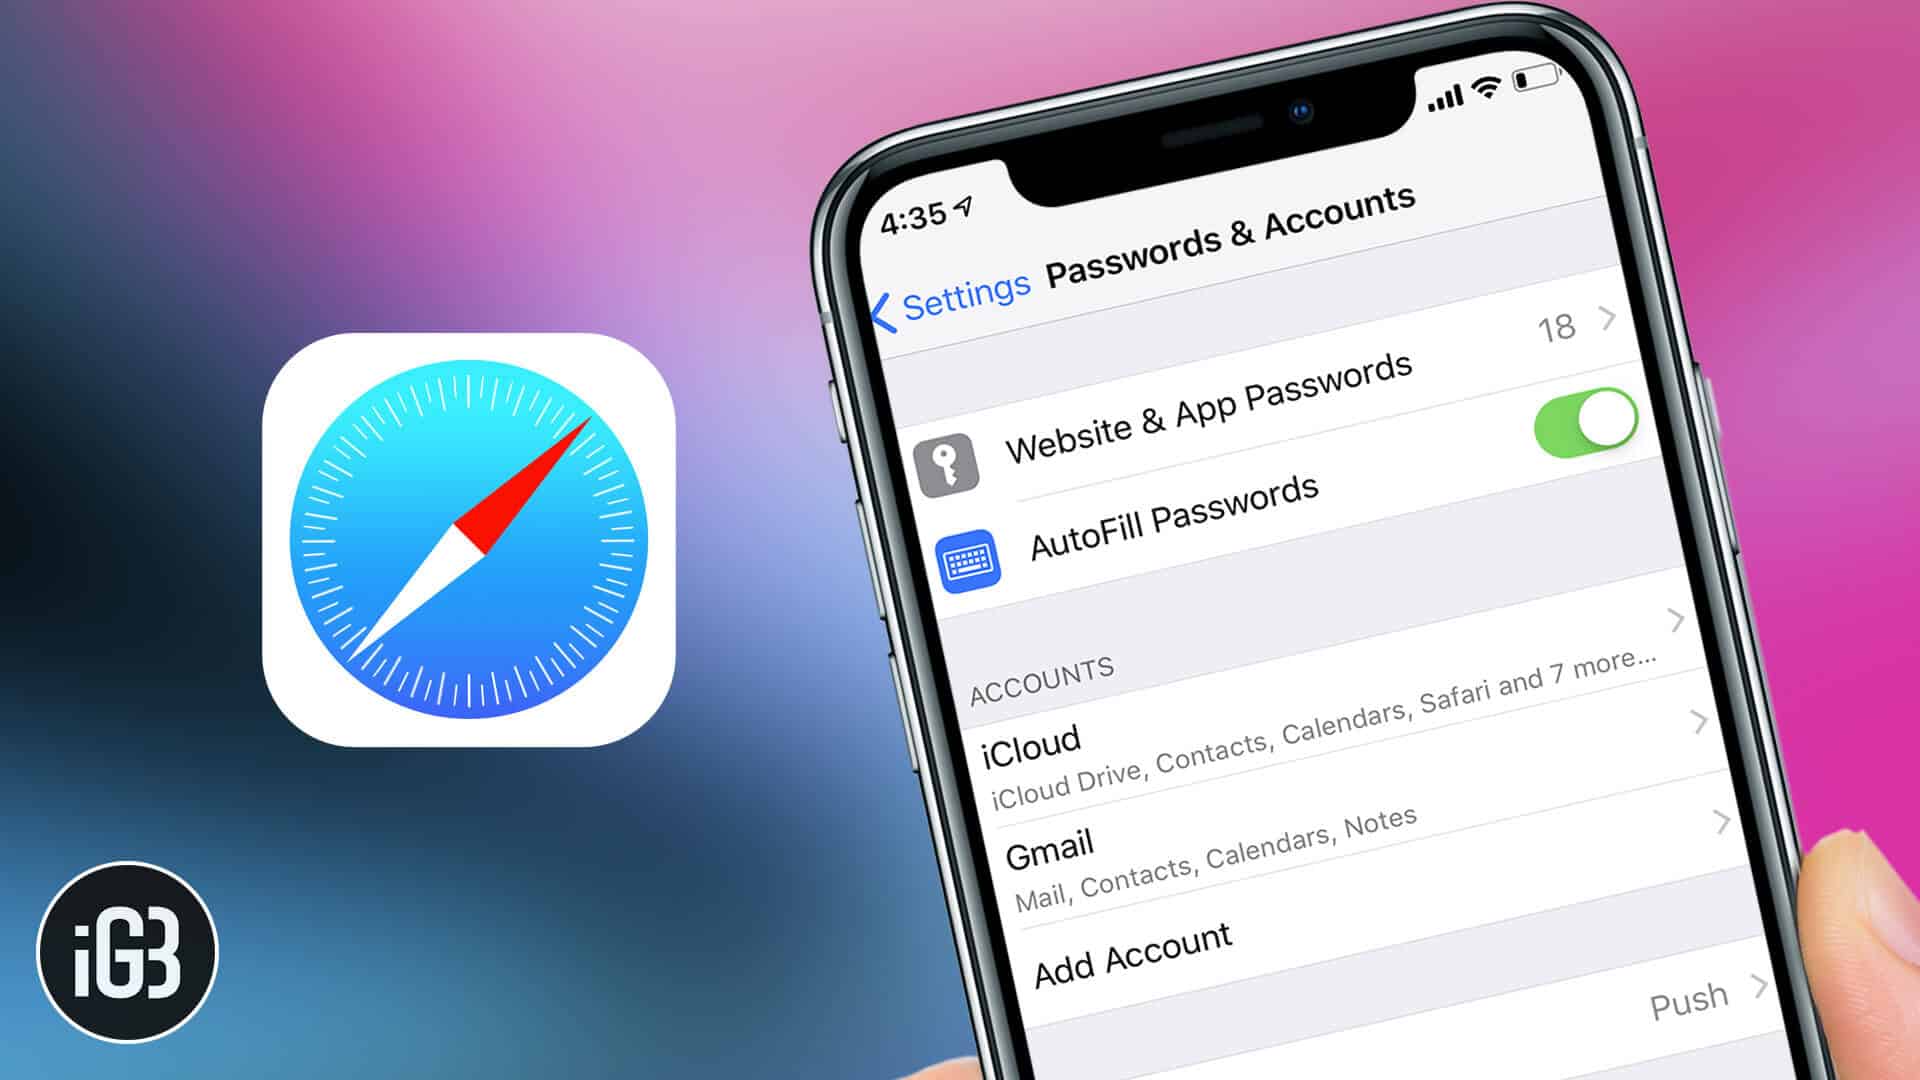 How to allow safari to save passwords for websites on iphone or ipad